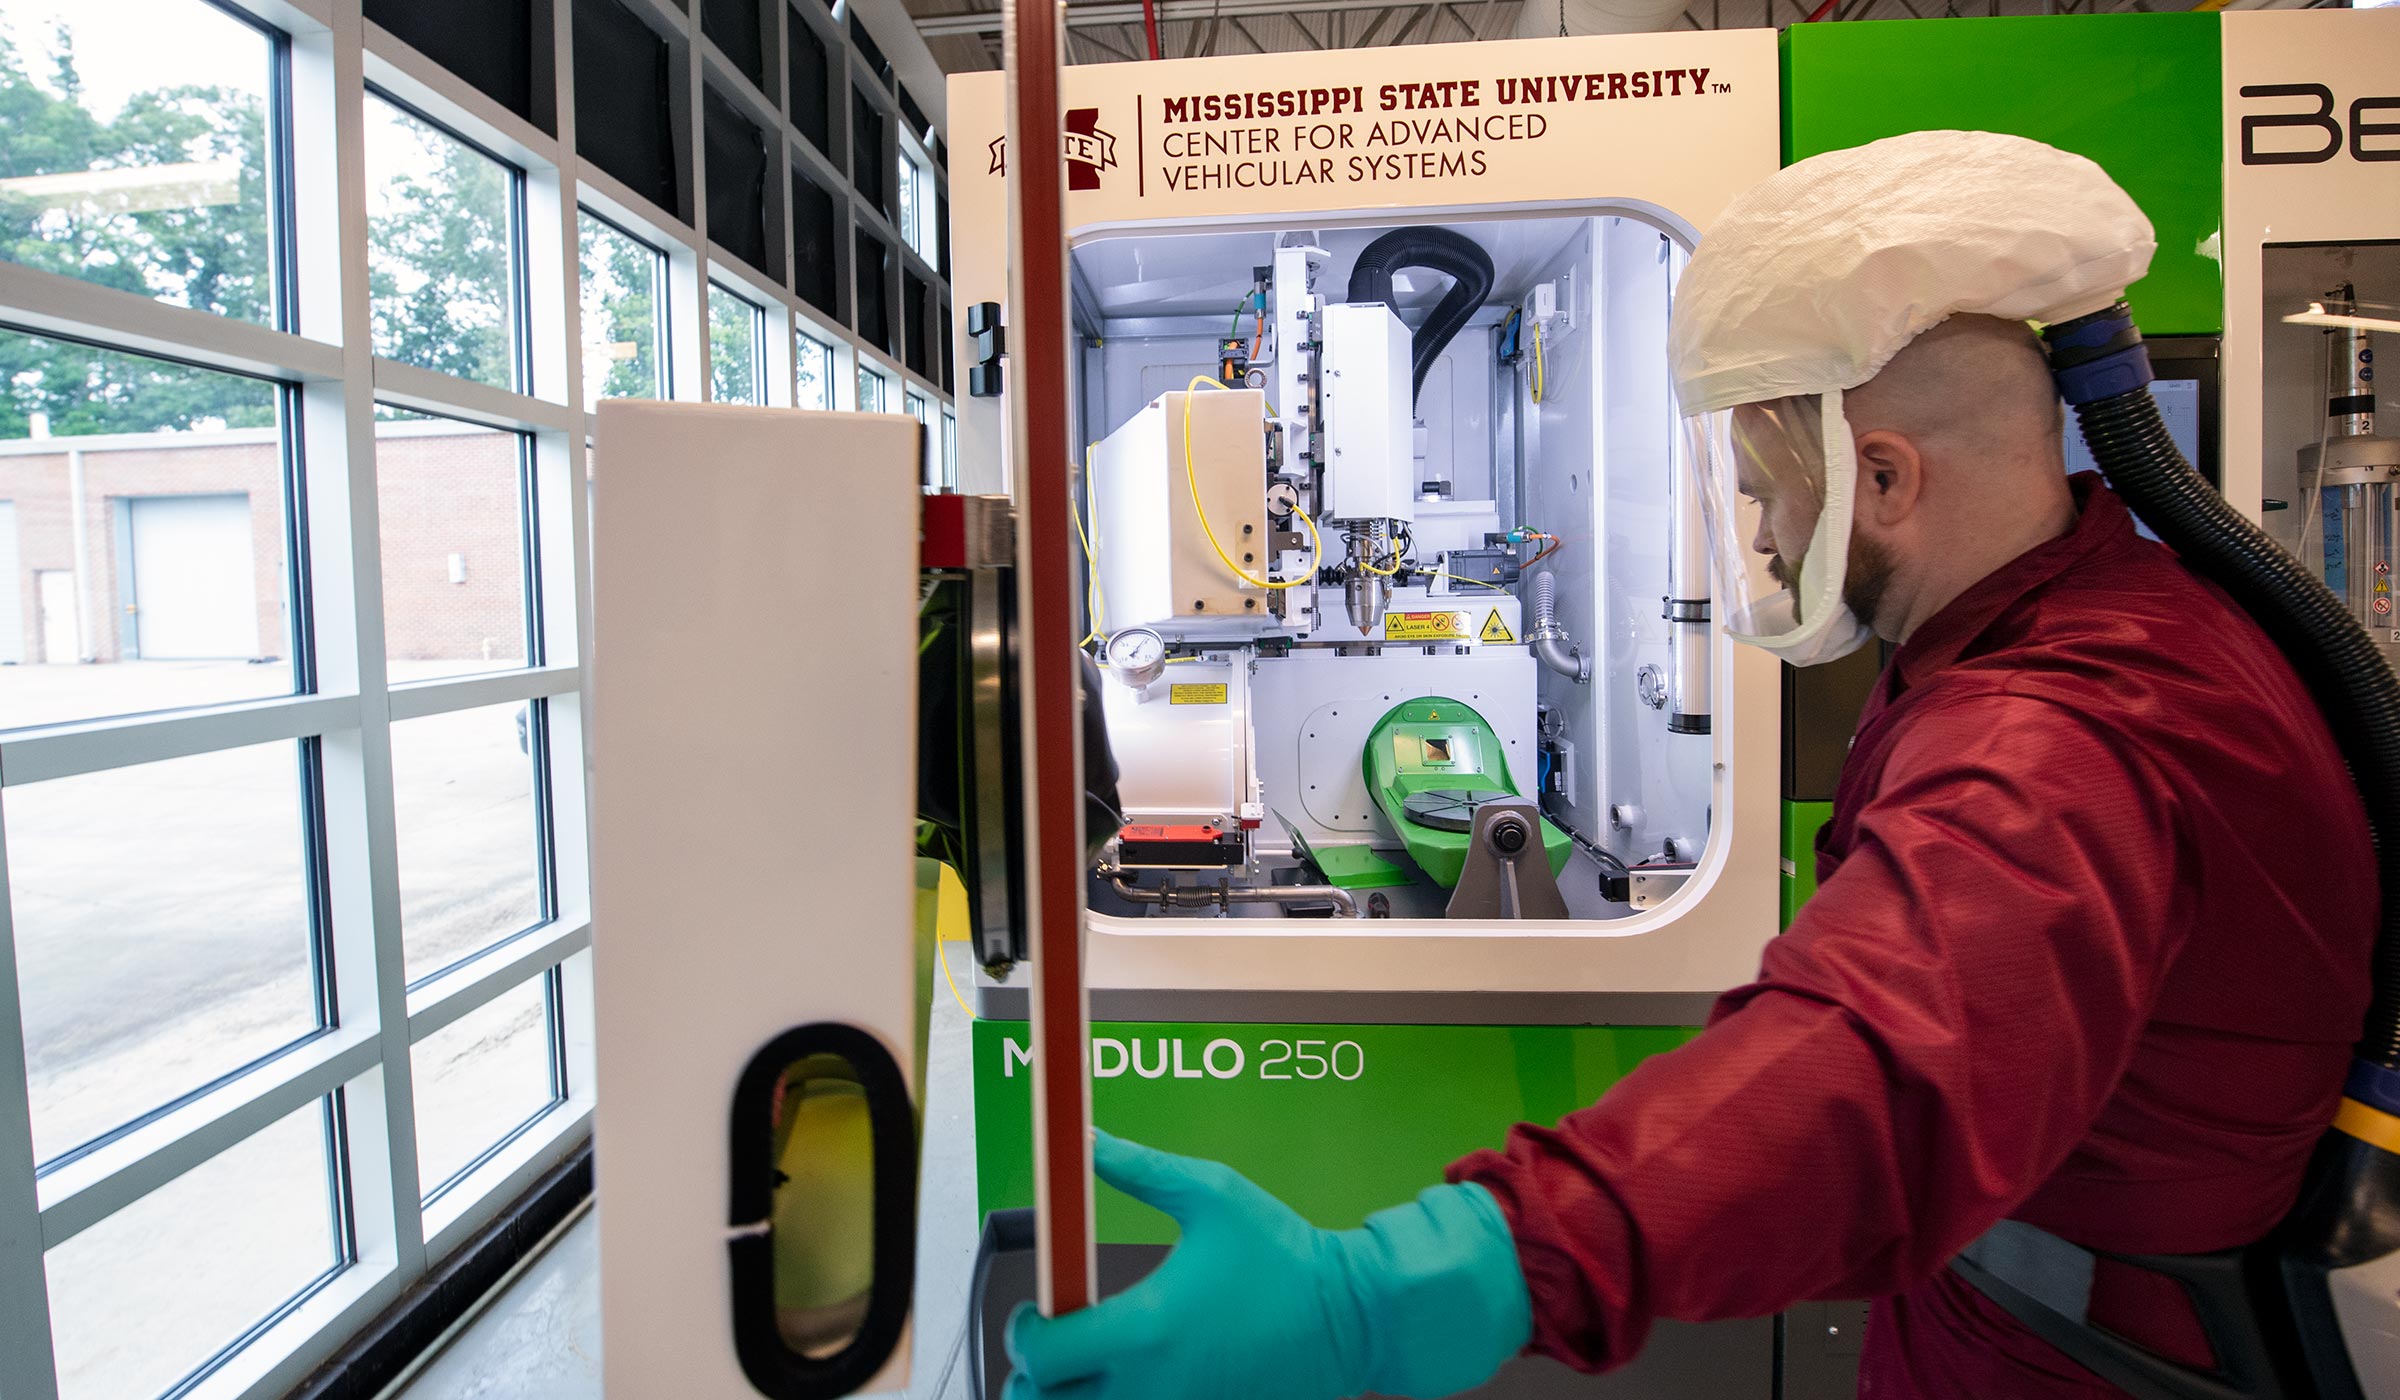 CAVS Research Engineer - wearing full face clear protective lab face covering - opens door to Additive Manufacturing Lab&#039;s large BeAM Modulo 250 machine, which is white and green.